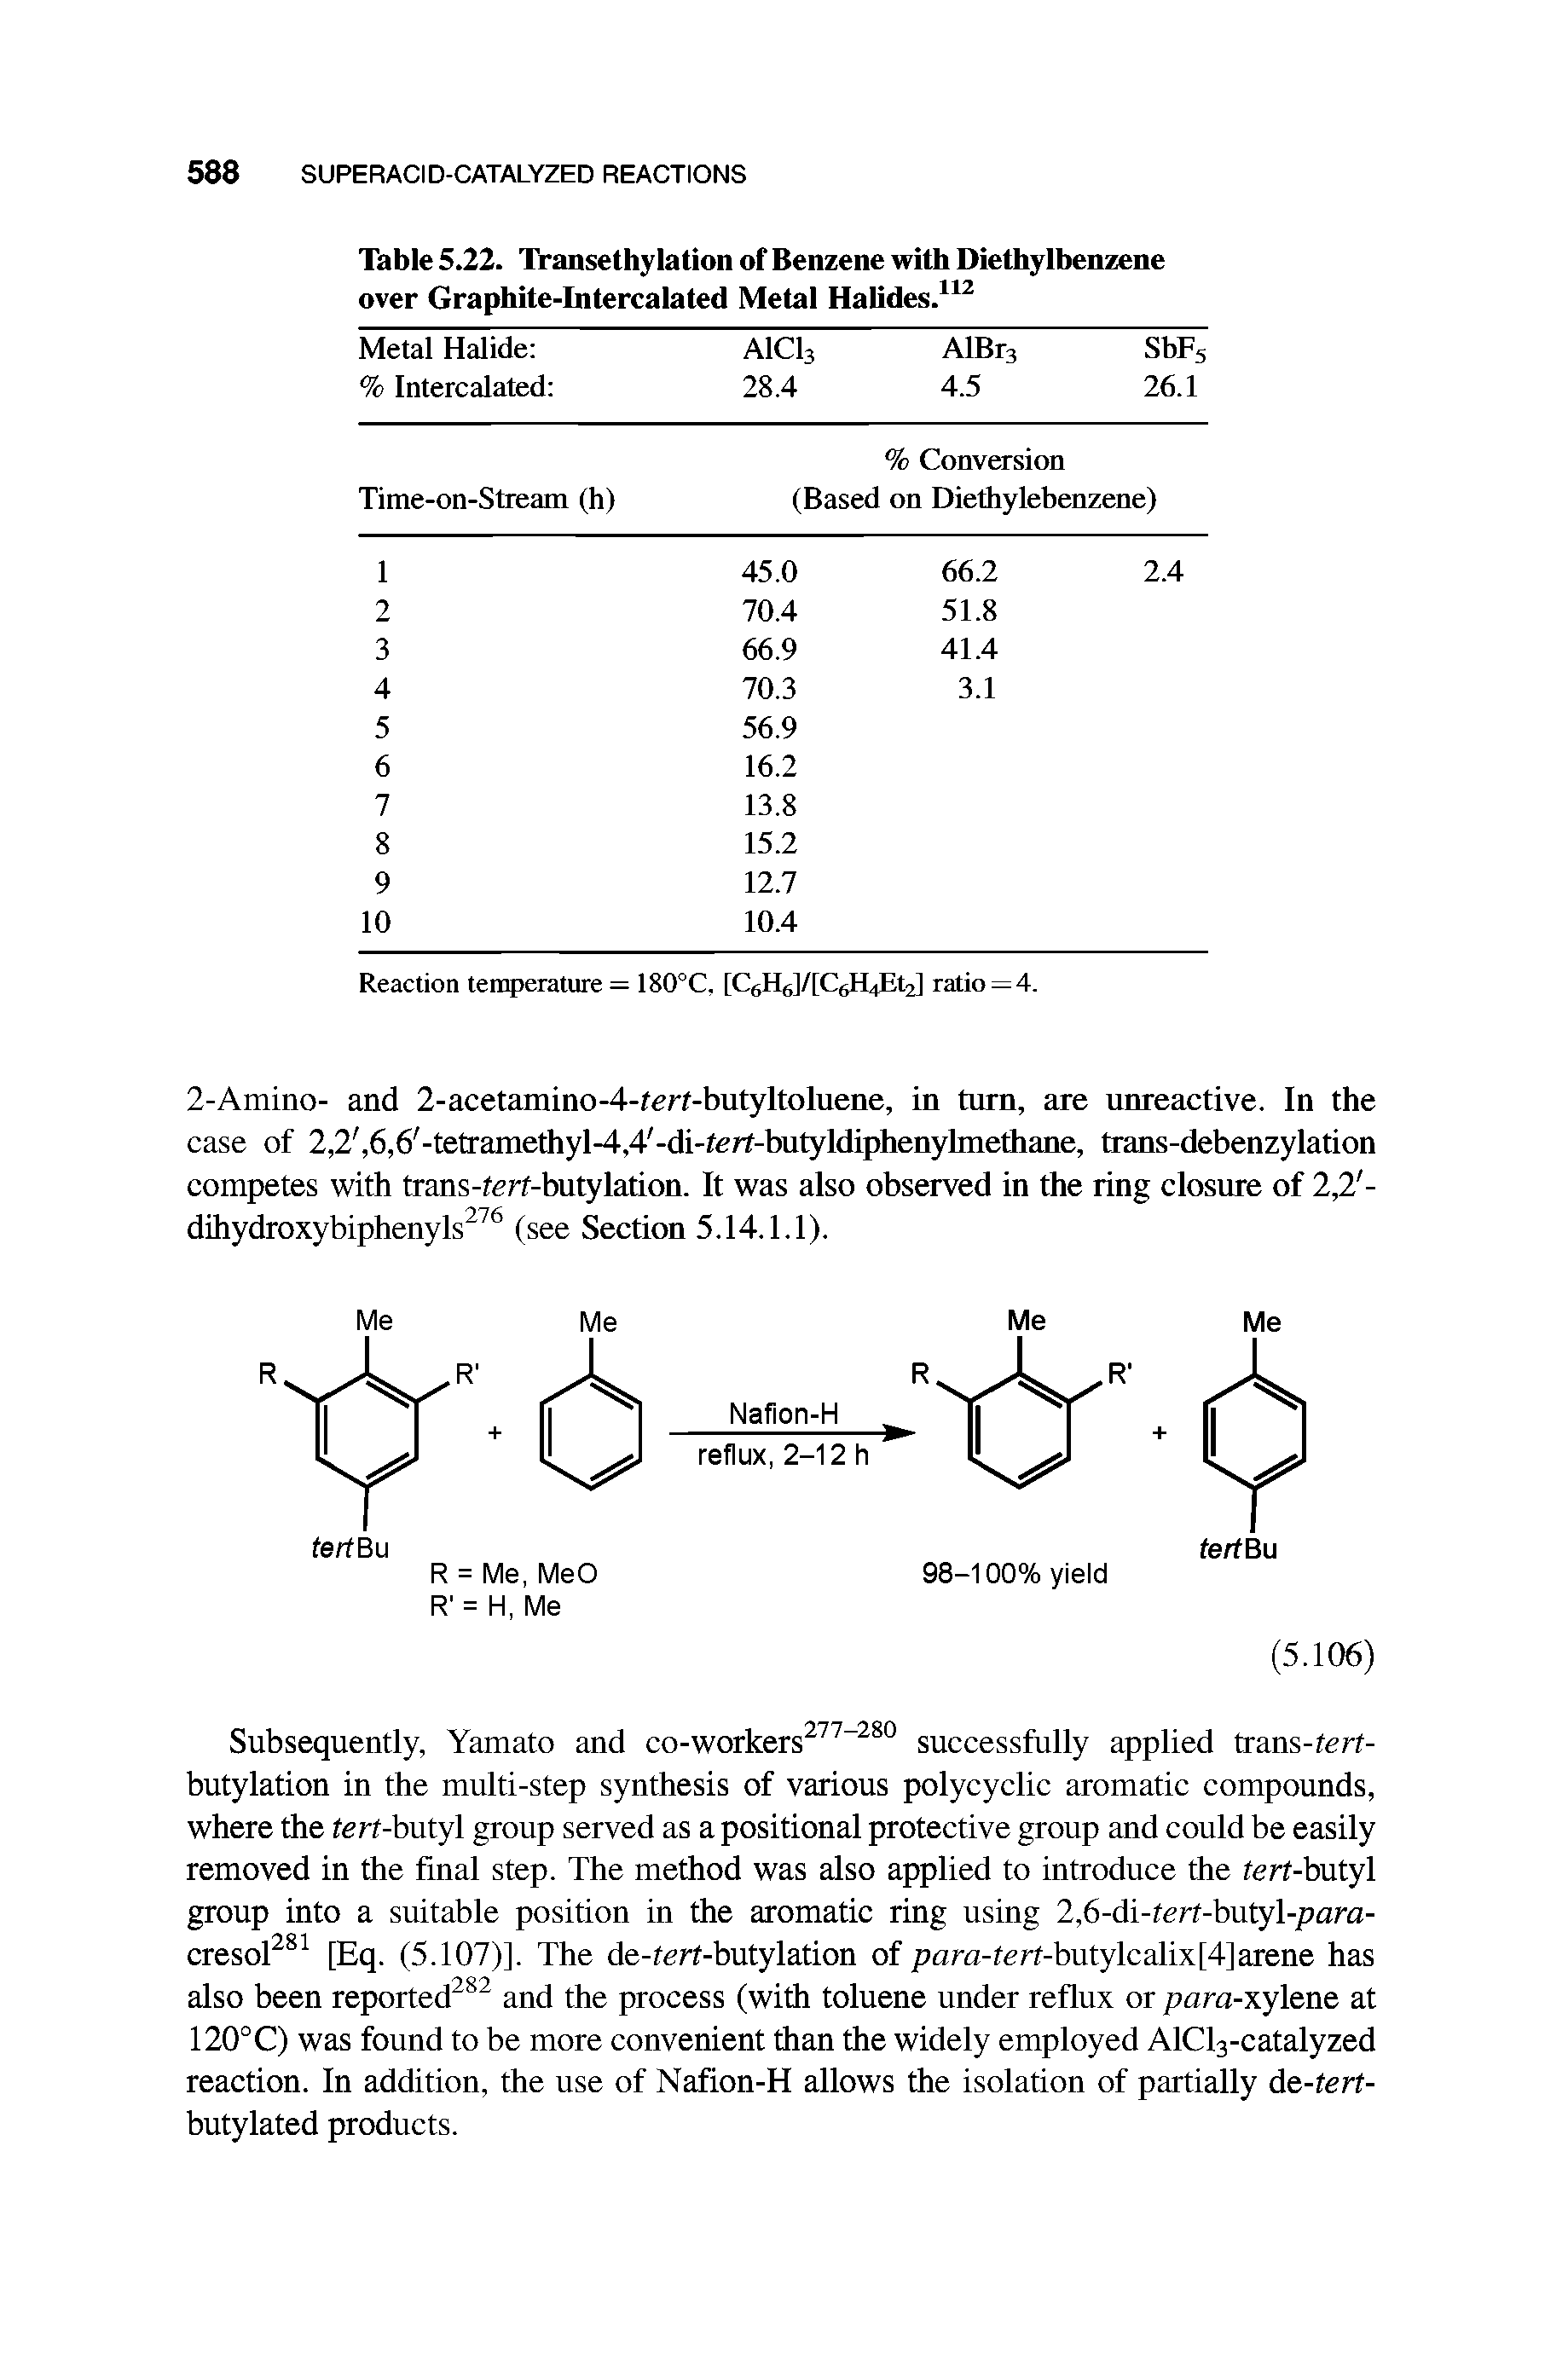 Table 5.22. Transethylation of Benzene with Diethylbenzene over Graphite-Intercalated Metal Halides.112...